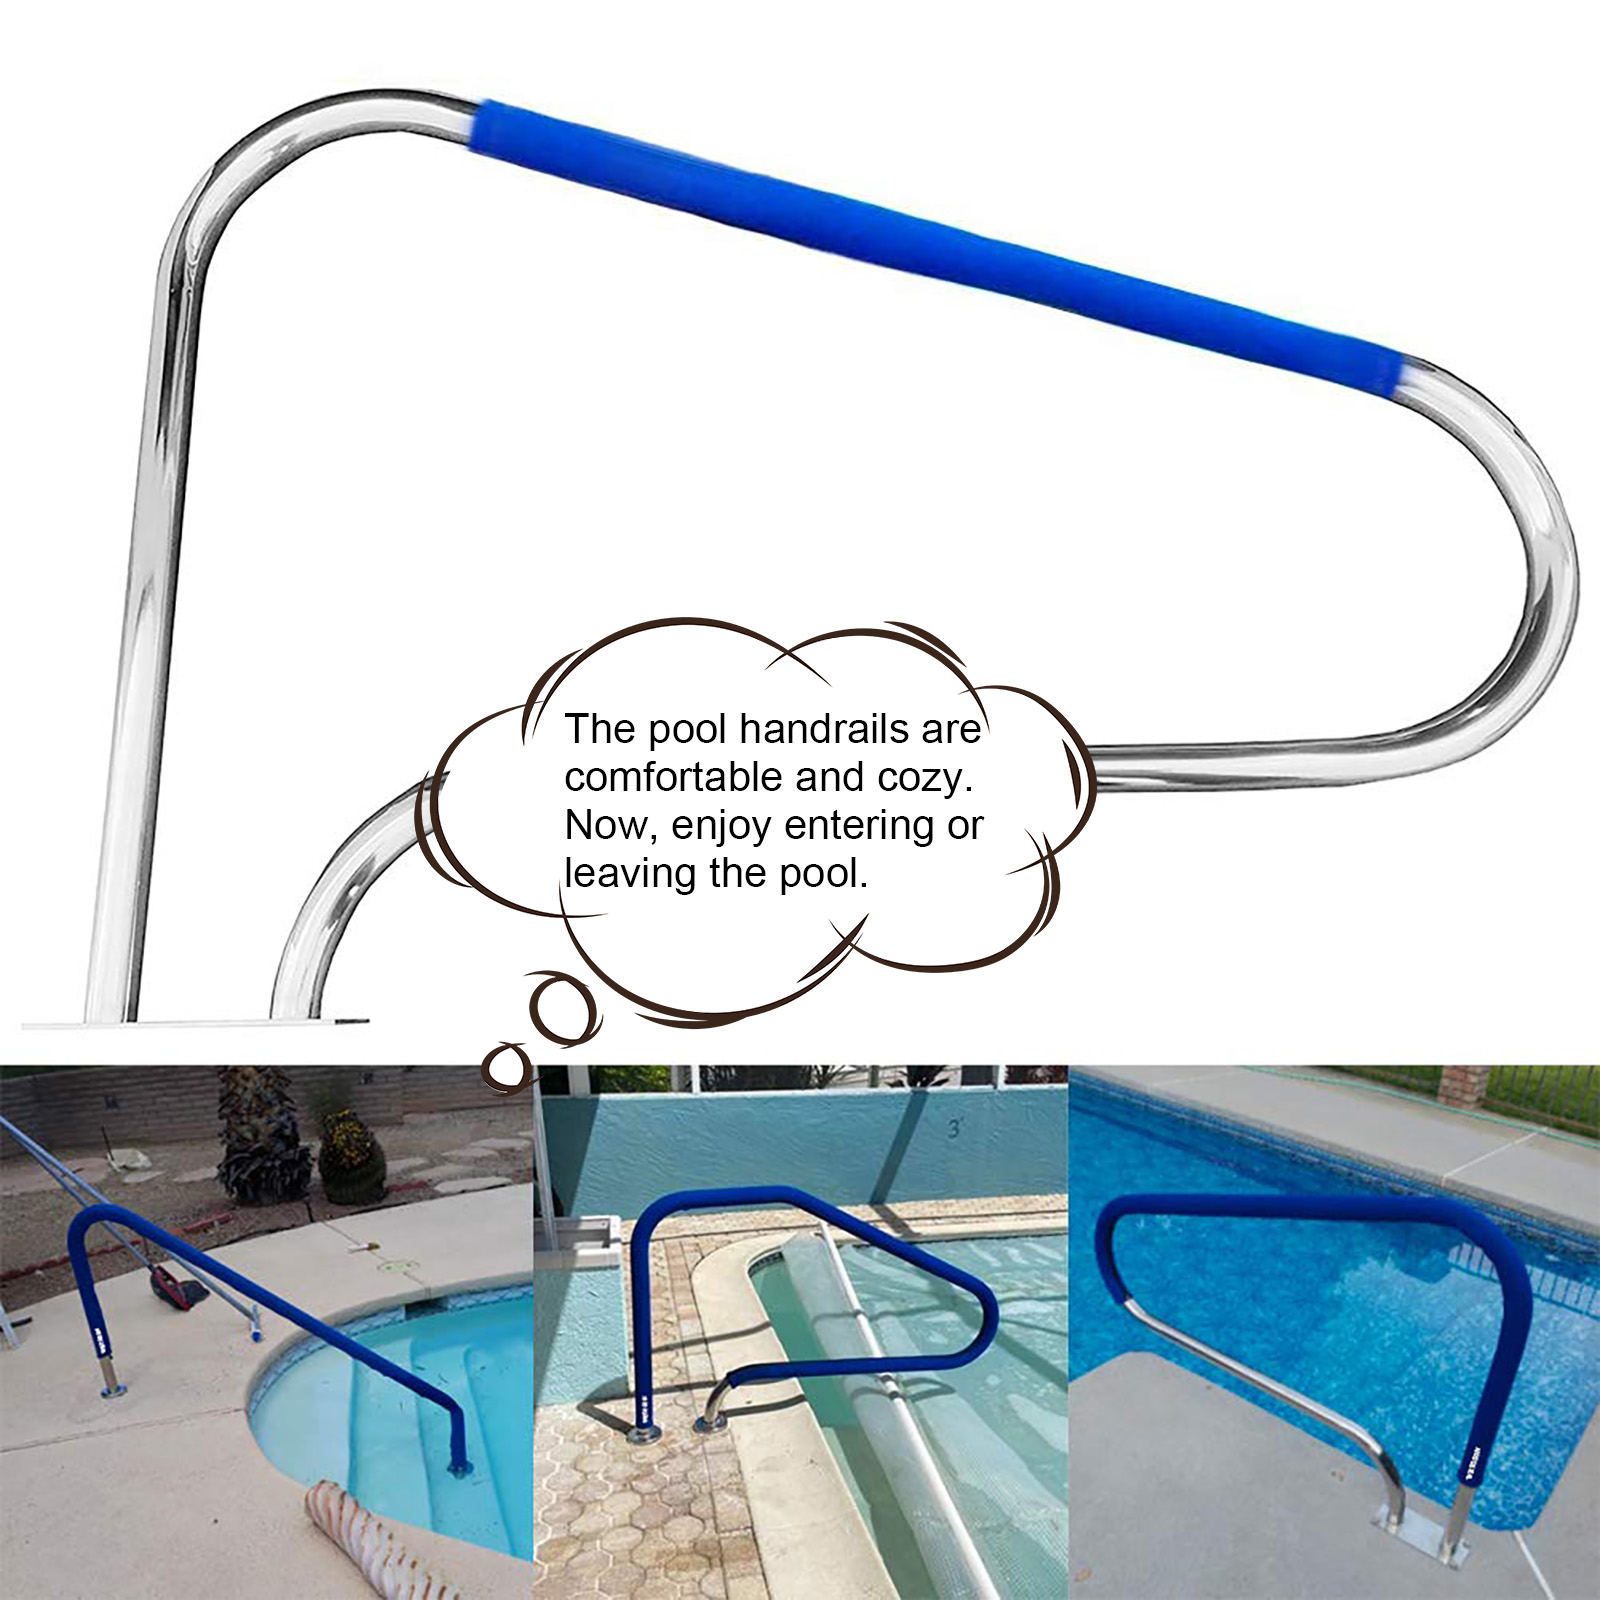 Swimming Pool Handrail Cover Safety Ladder Soft Blue Grip Protector (8ft) от Cesdeals WW